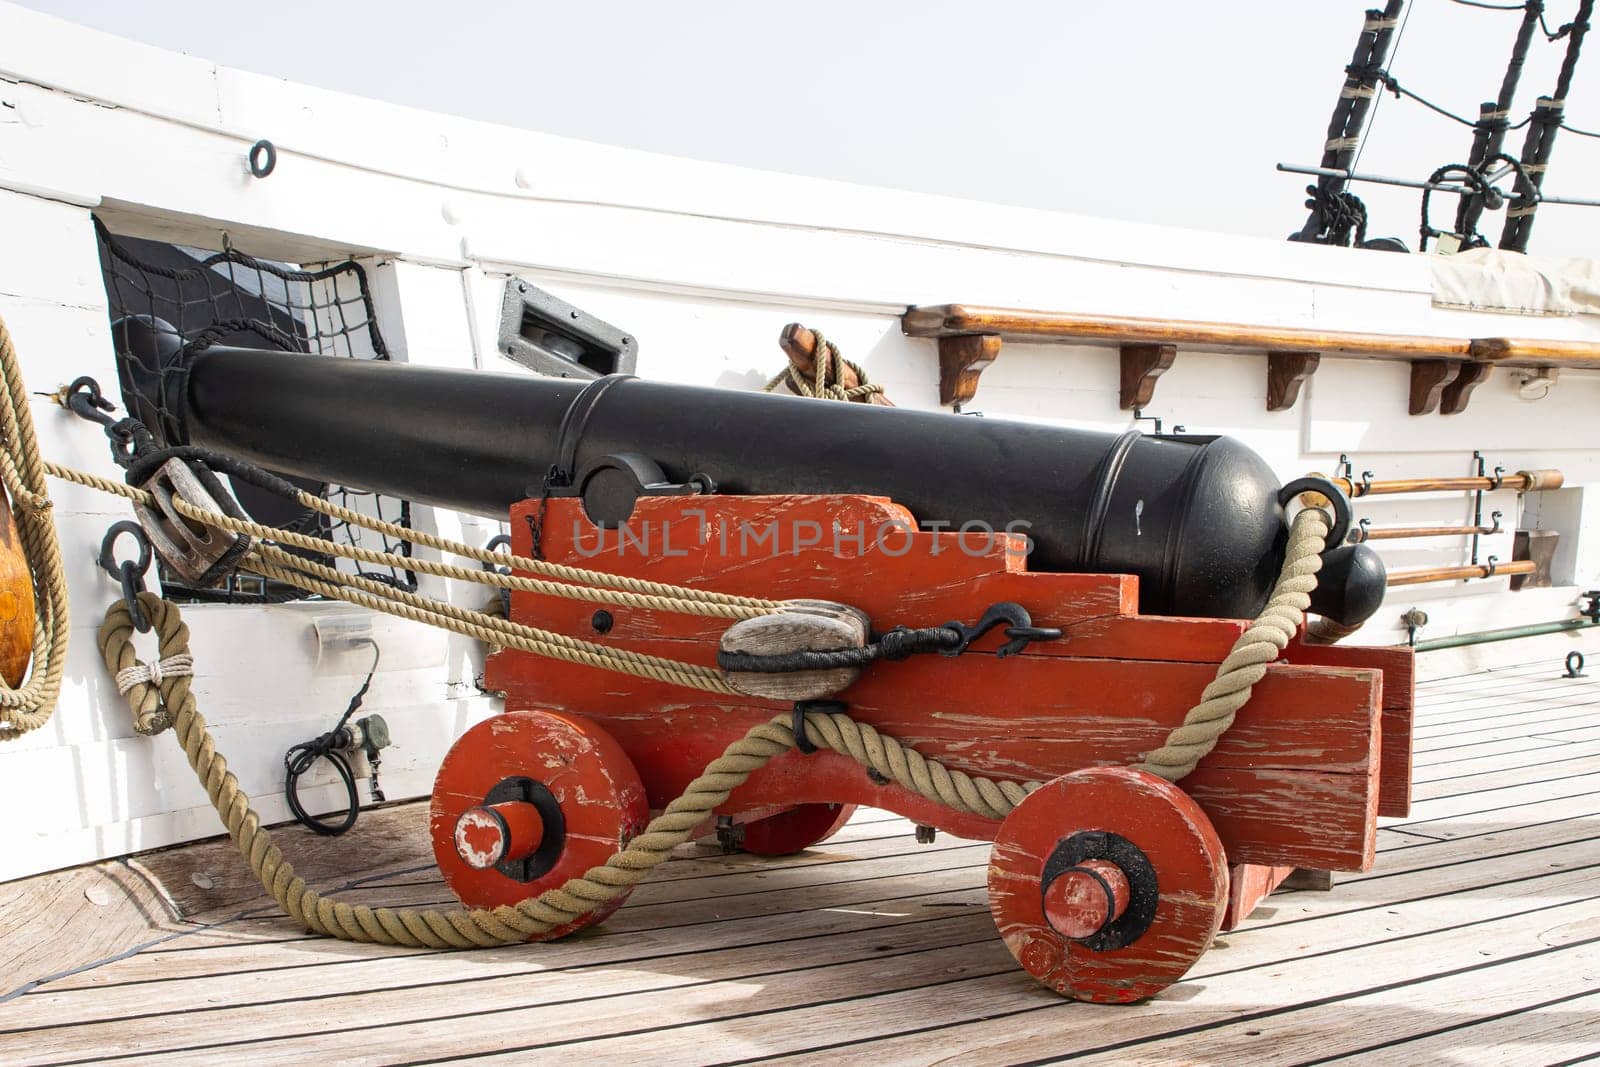 Historirical retro metal cannon on battle sailing vessel - stand on deck